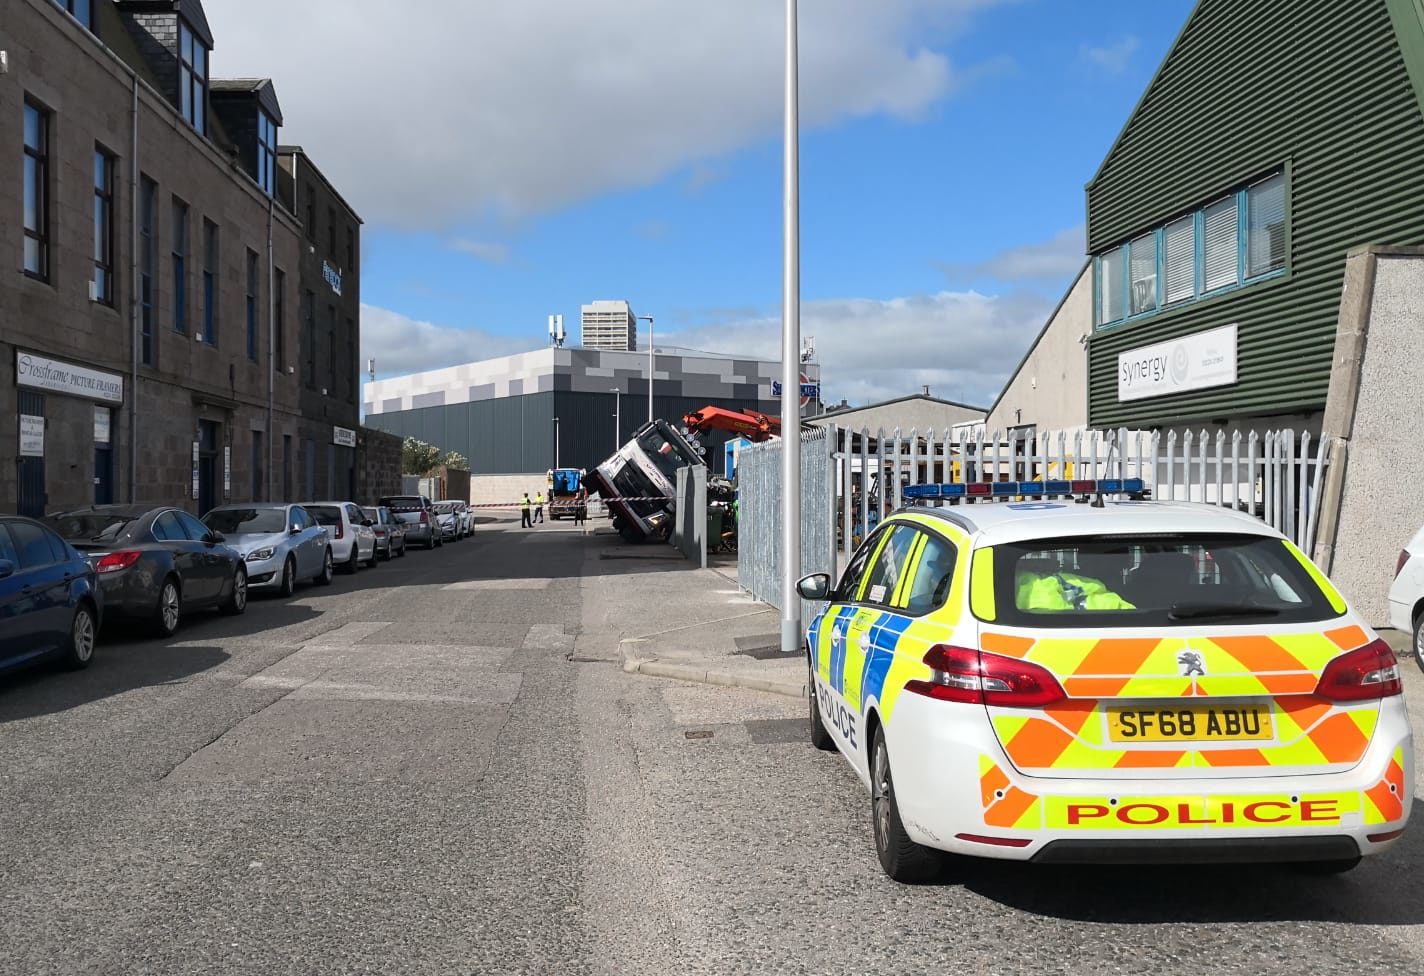 Police on site of the incident on Cotton Street in Aberdeen.